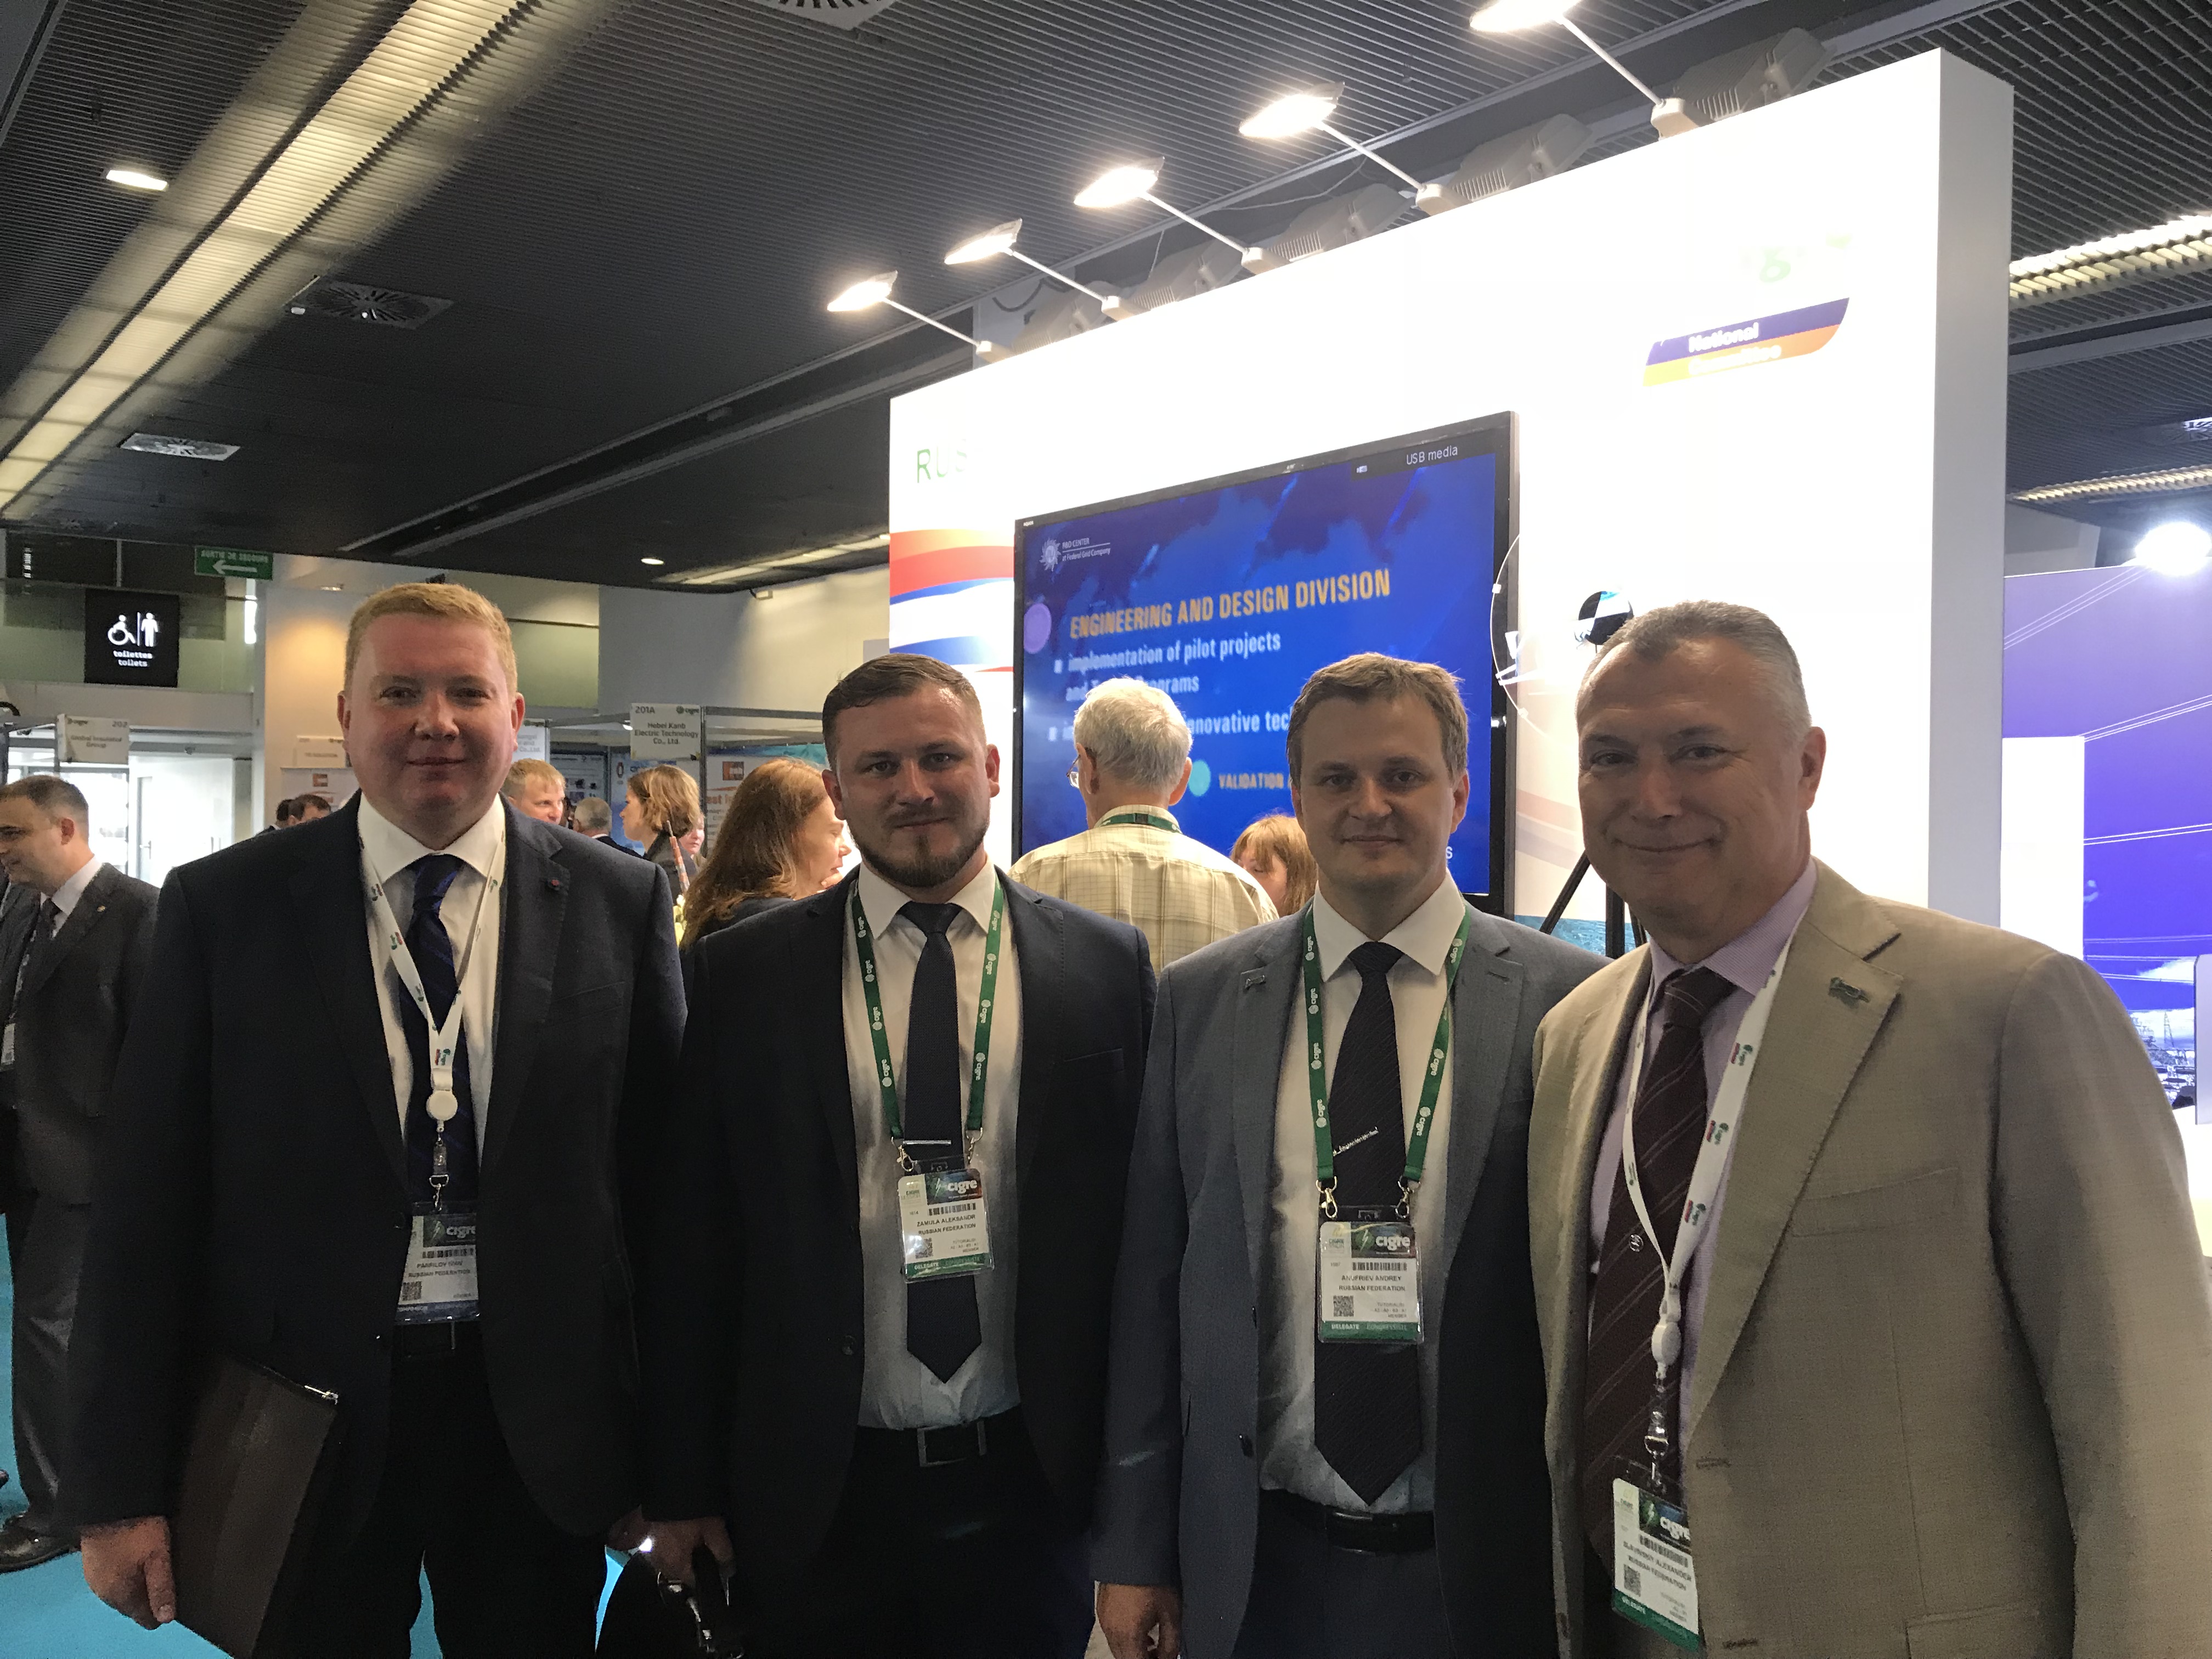 Meeting with representatives of Togliatti Transformer Limited, from left to right: Ivan Panfilov, representatives of Togliatti Transformer Alexander Zamula and Andrey Anufriev, Alexander Slavinsky